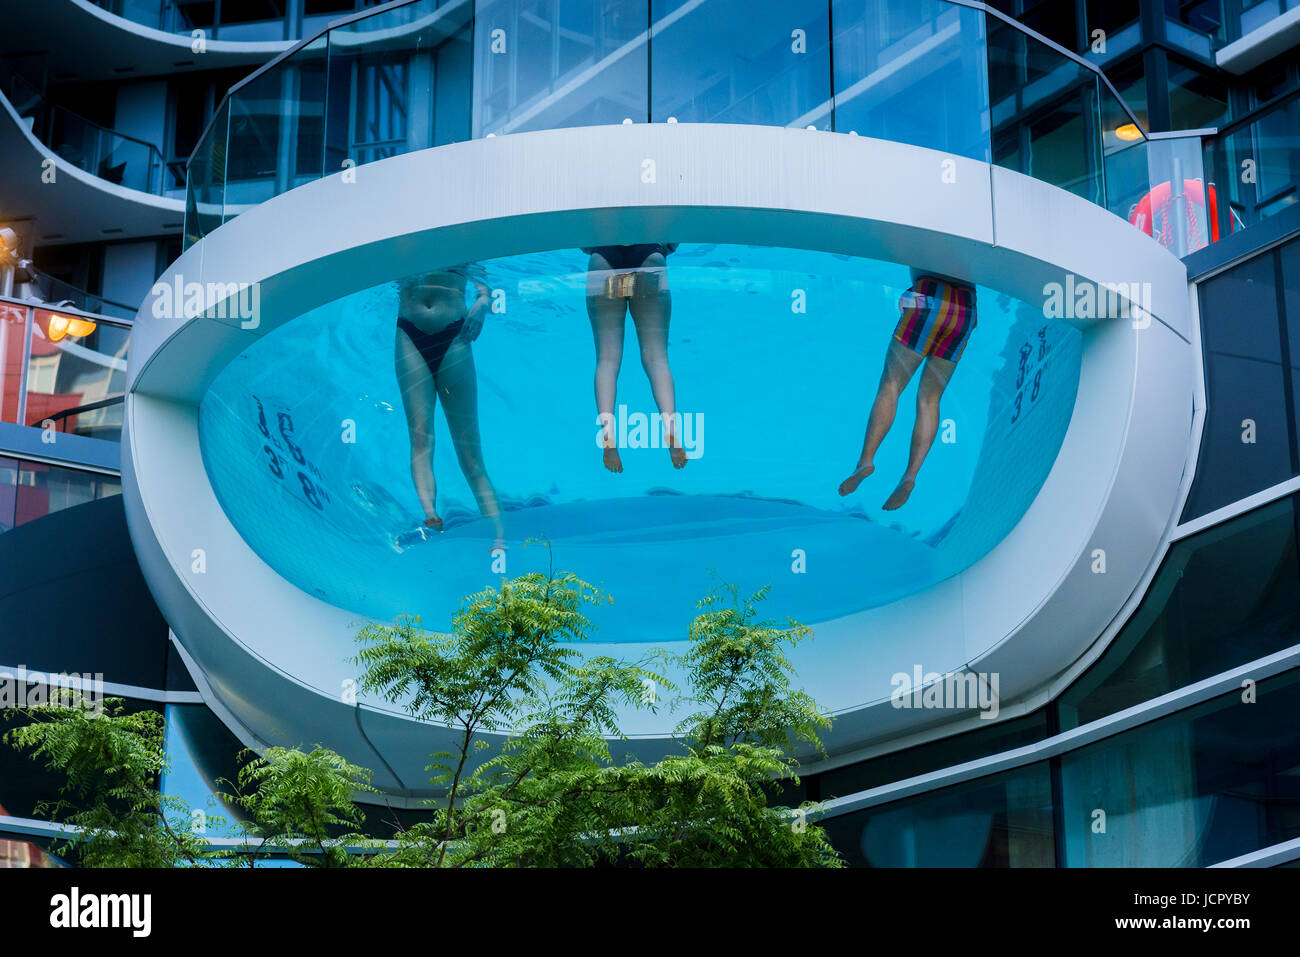 Glass bottomed, see through swimming pool, Yaletown, Vancouver, British Columbia, Canada. Stock Photo